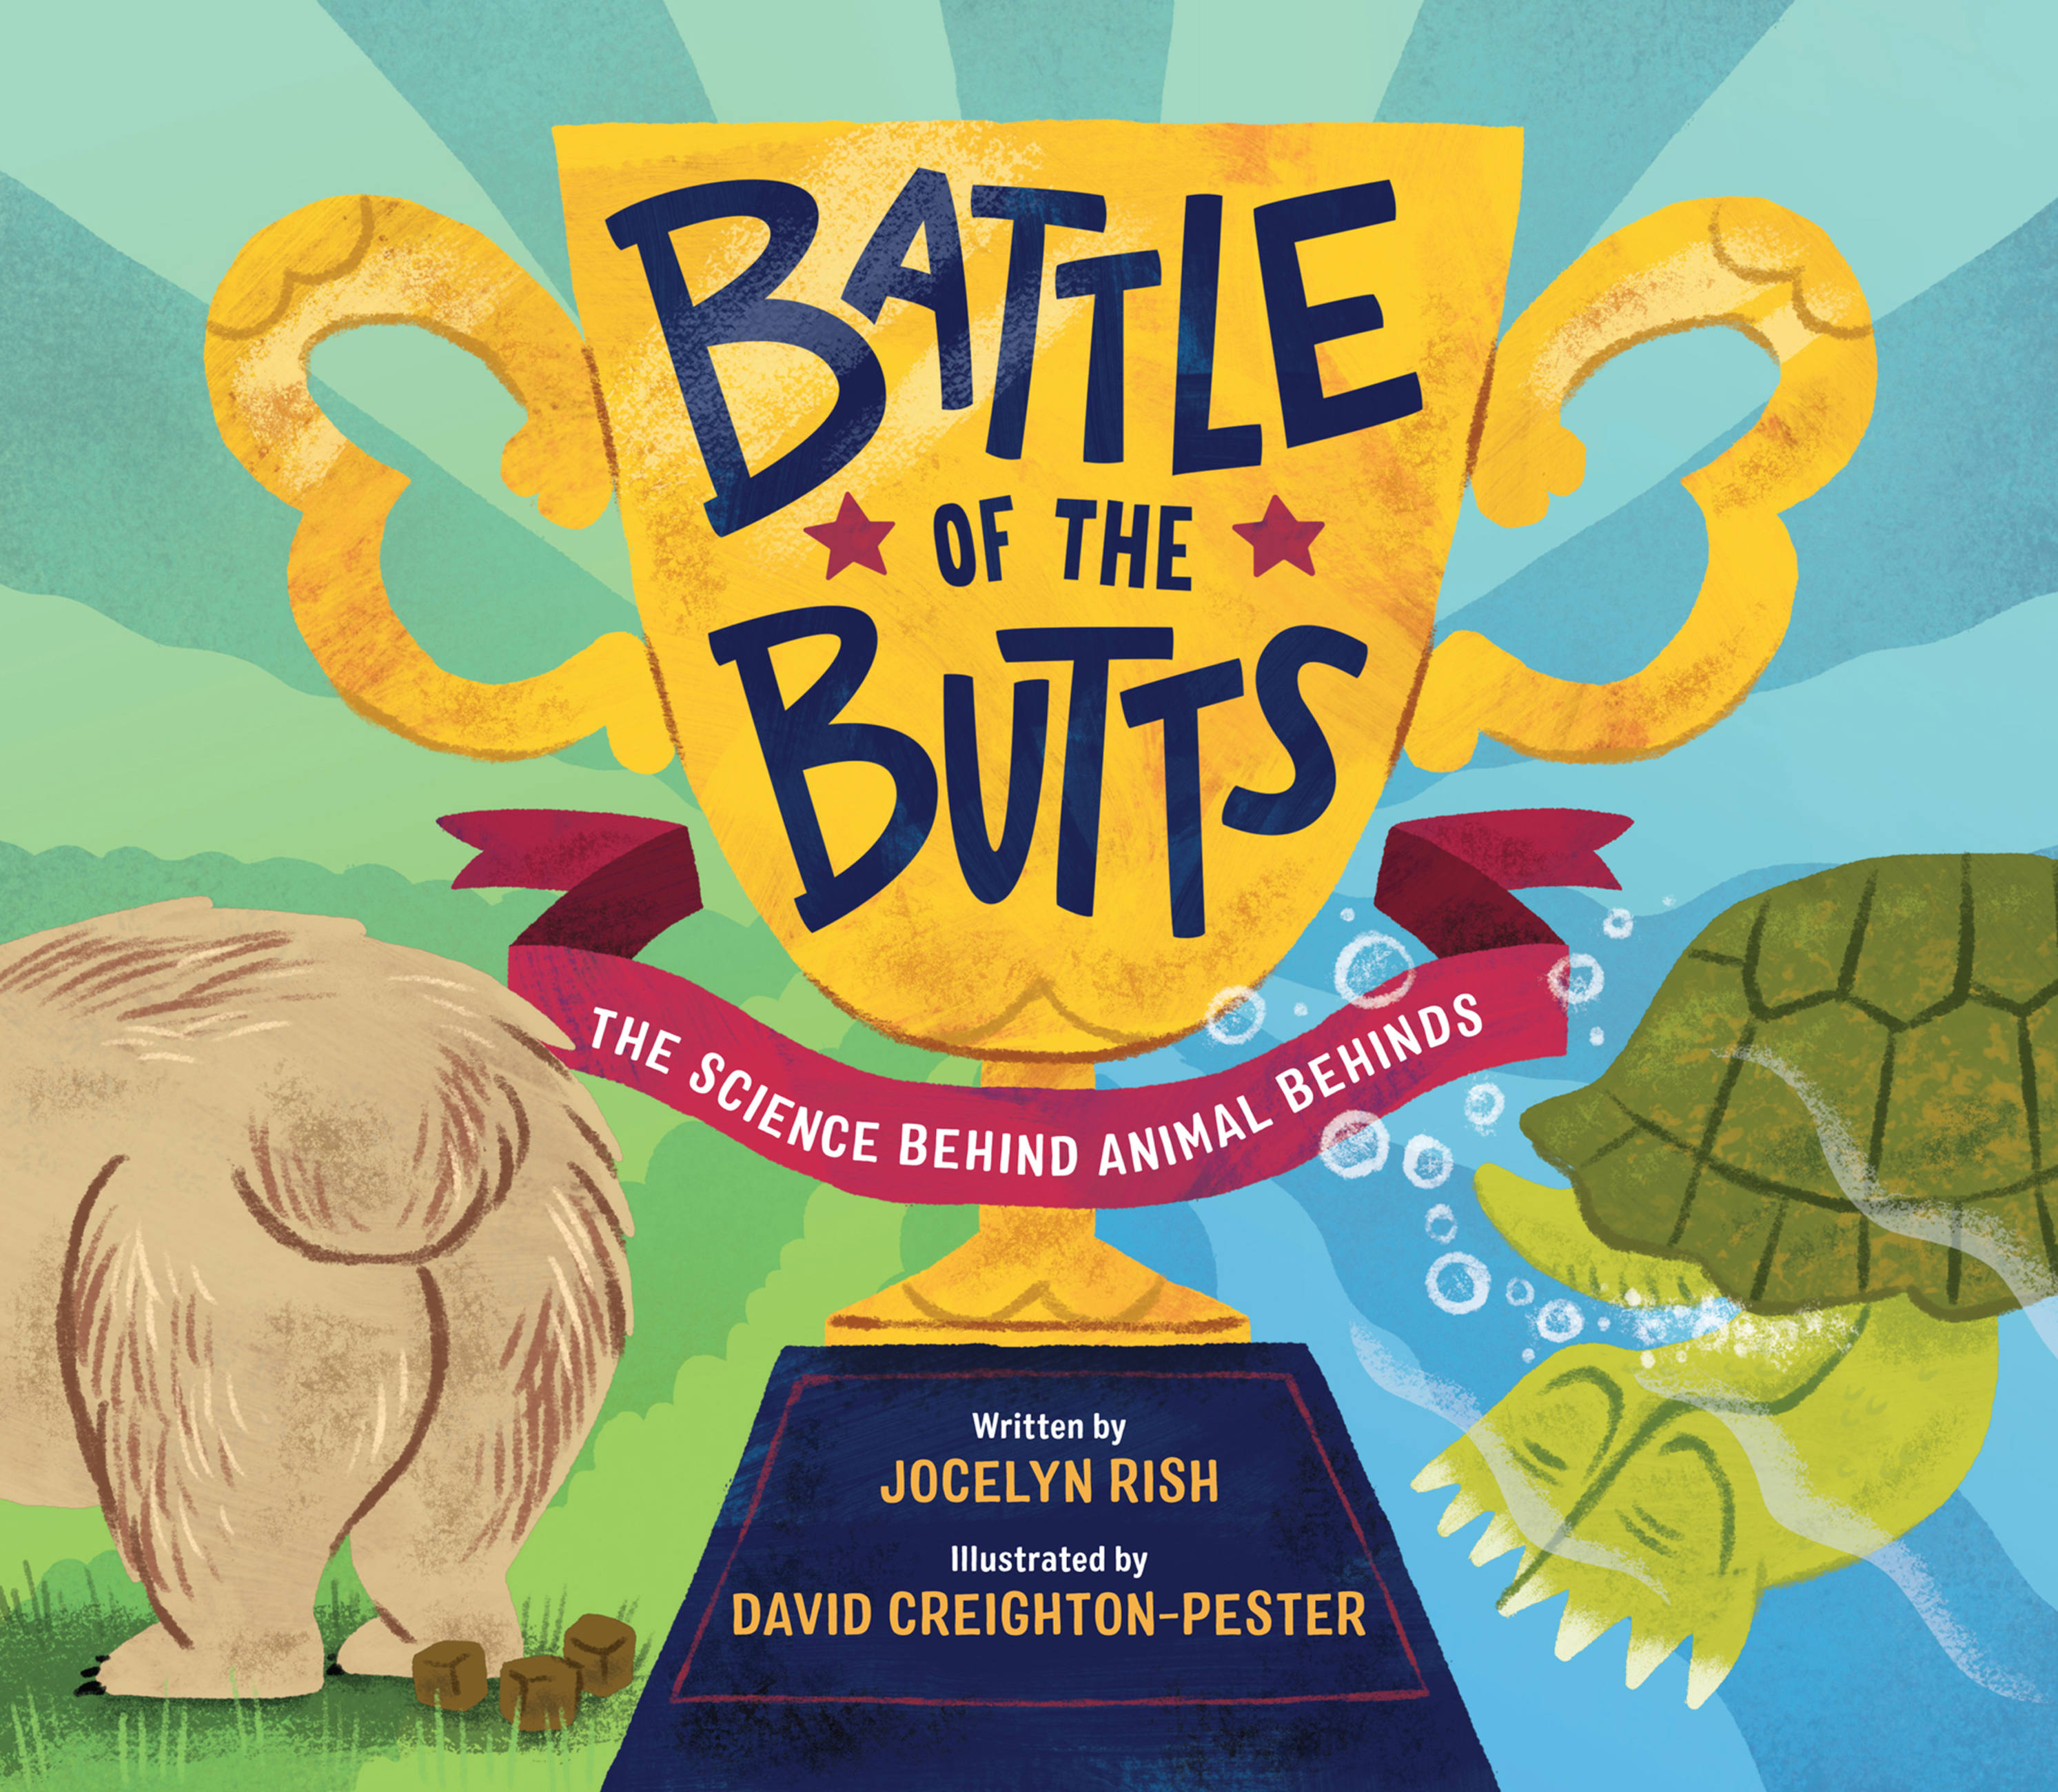 Battle of the Butts by Jocelyn Rish | Hachette Book Group